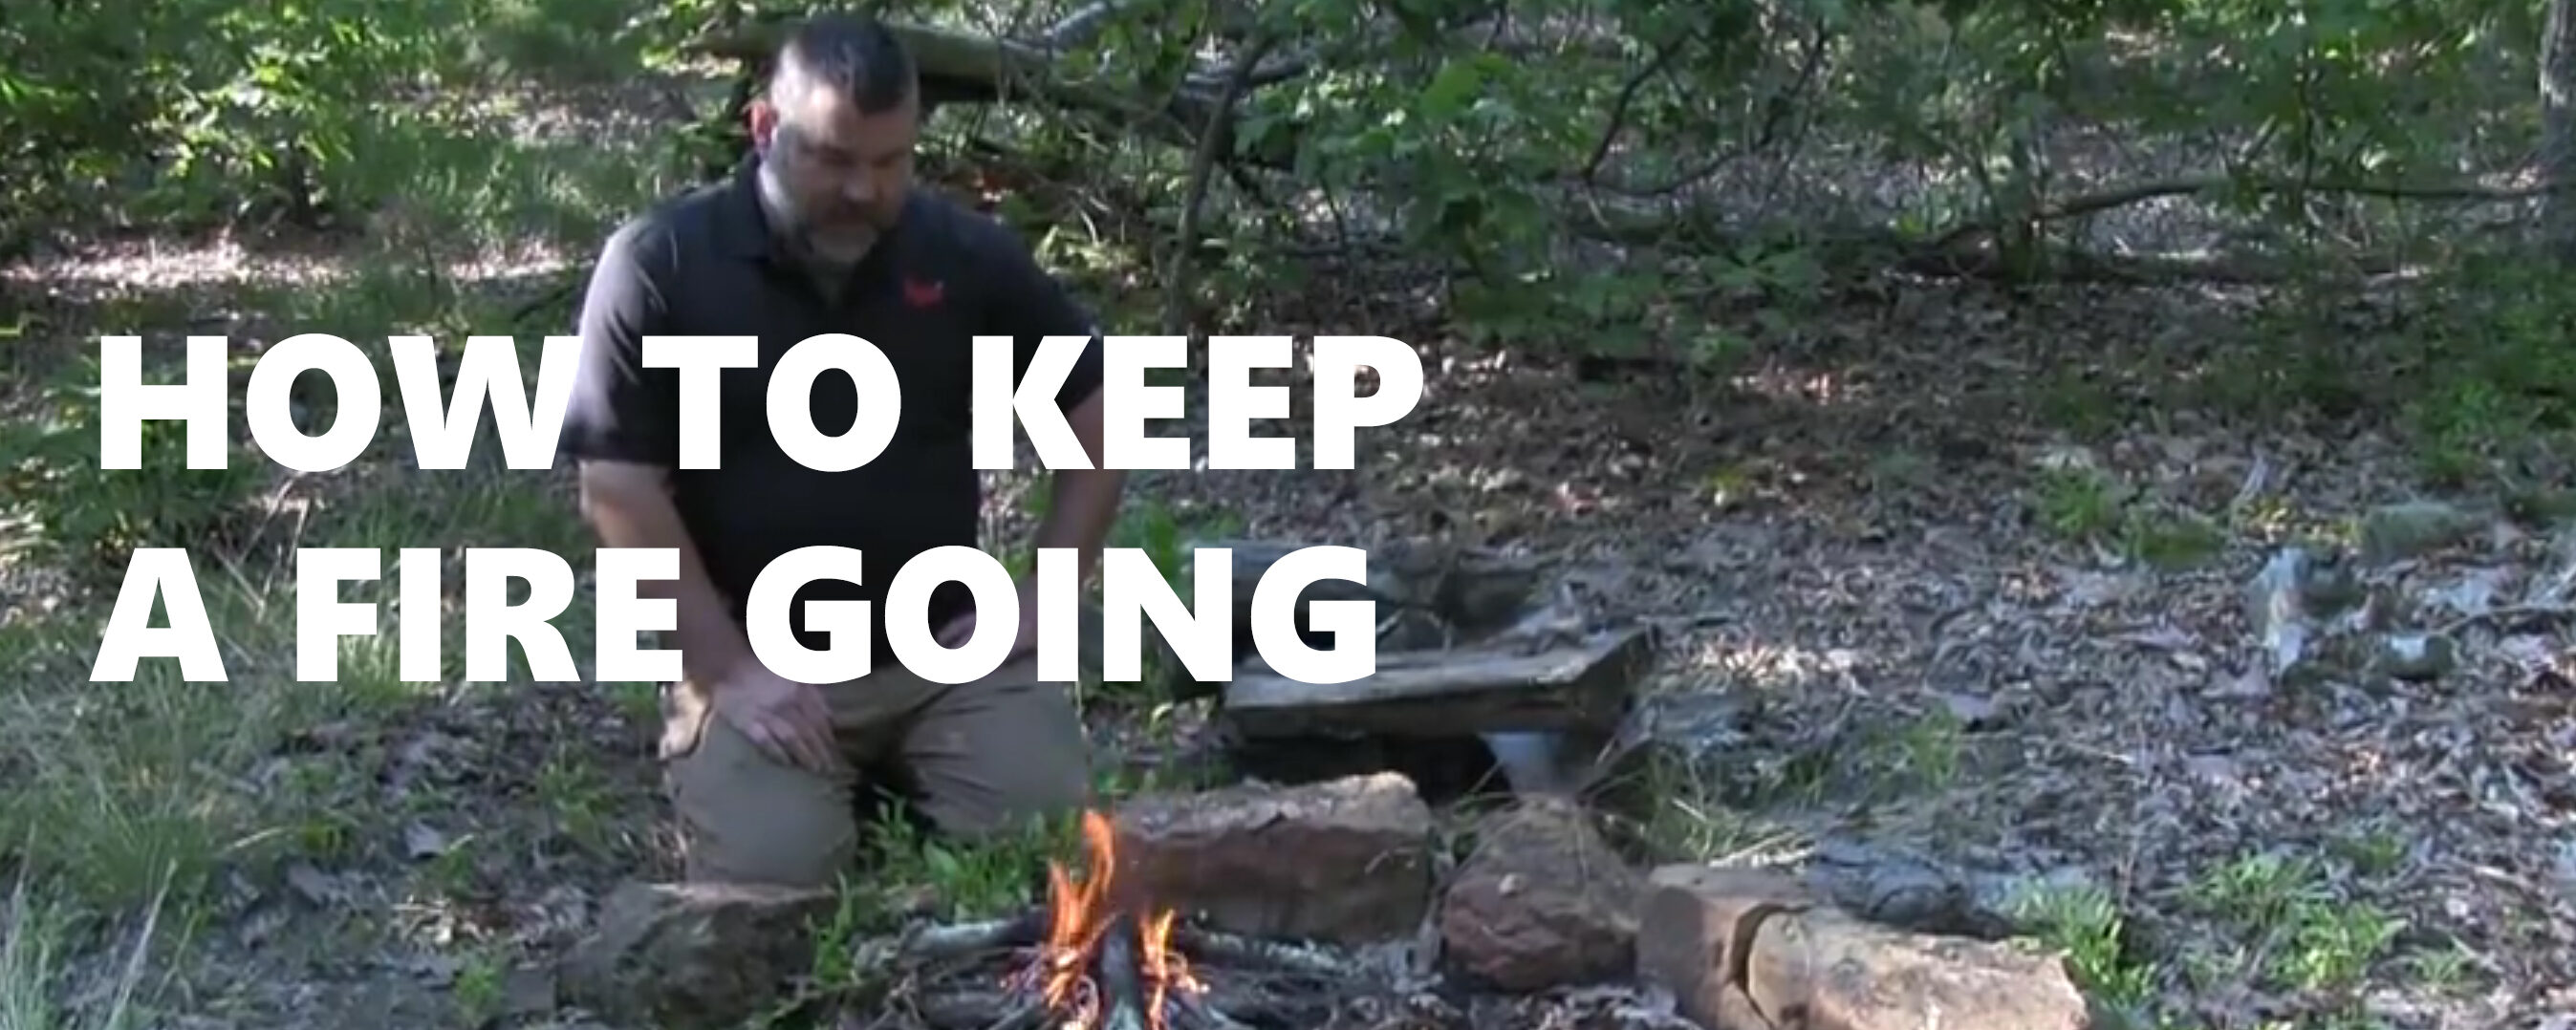 How To Keep a Fire Going